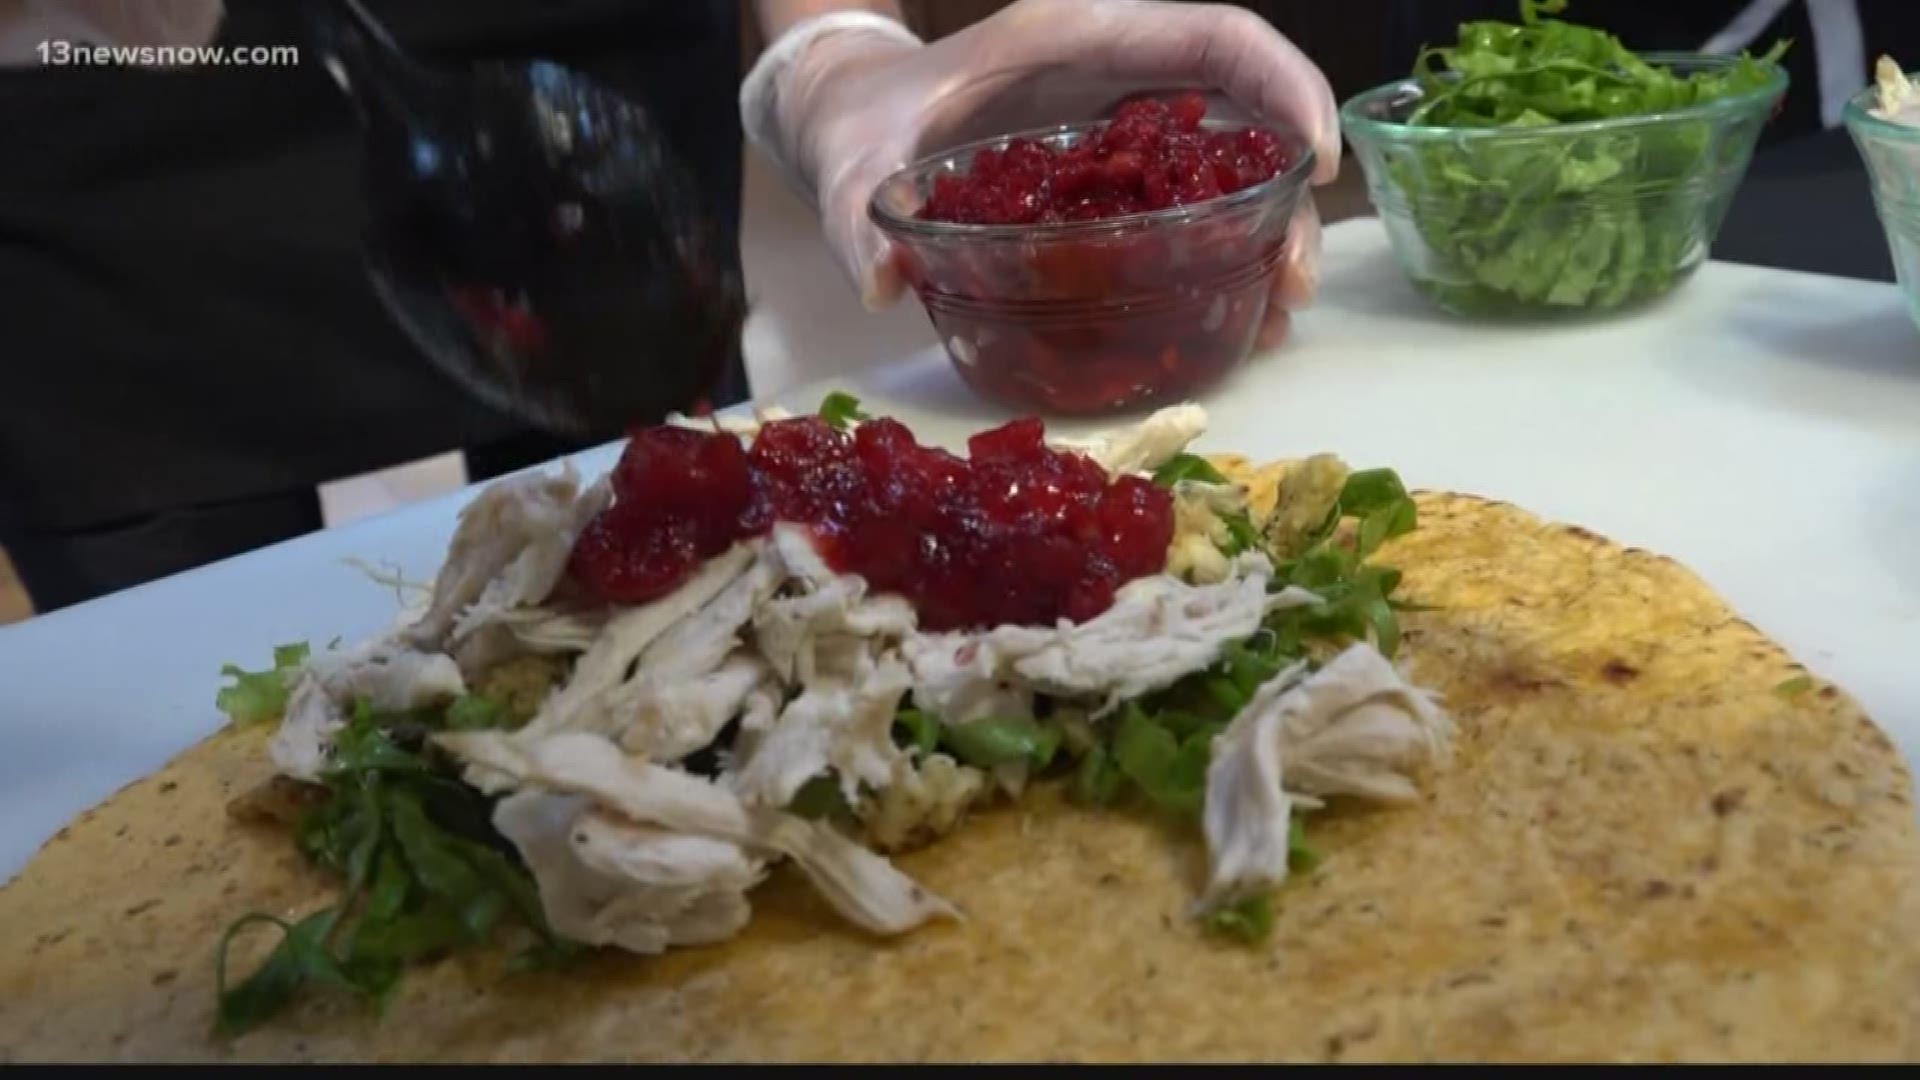 Thanksgiving has come and gone, and now it's time to get creative with your holiday feast leftovers.